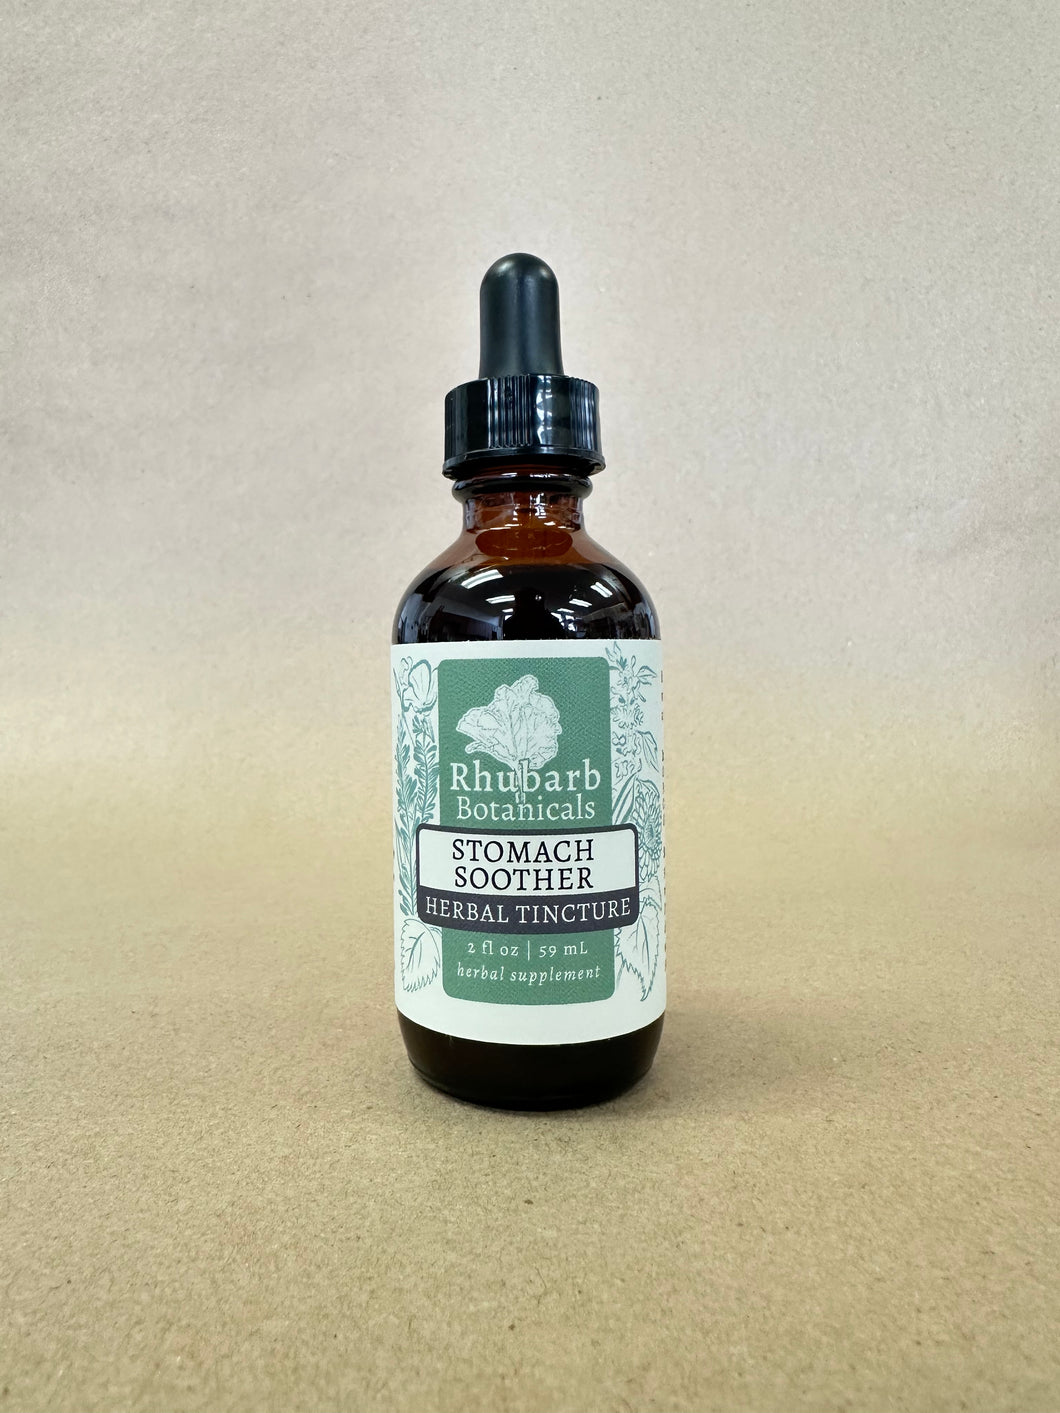 Stomach Soother Herbal Tincture